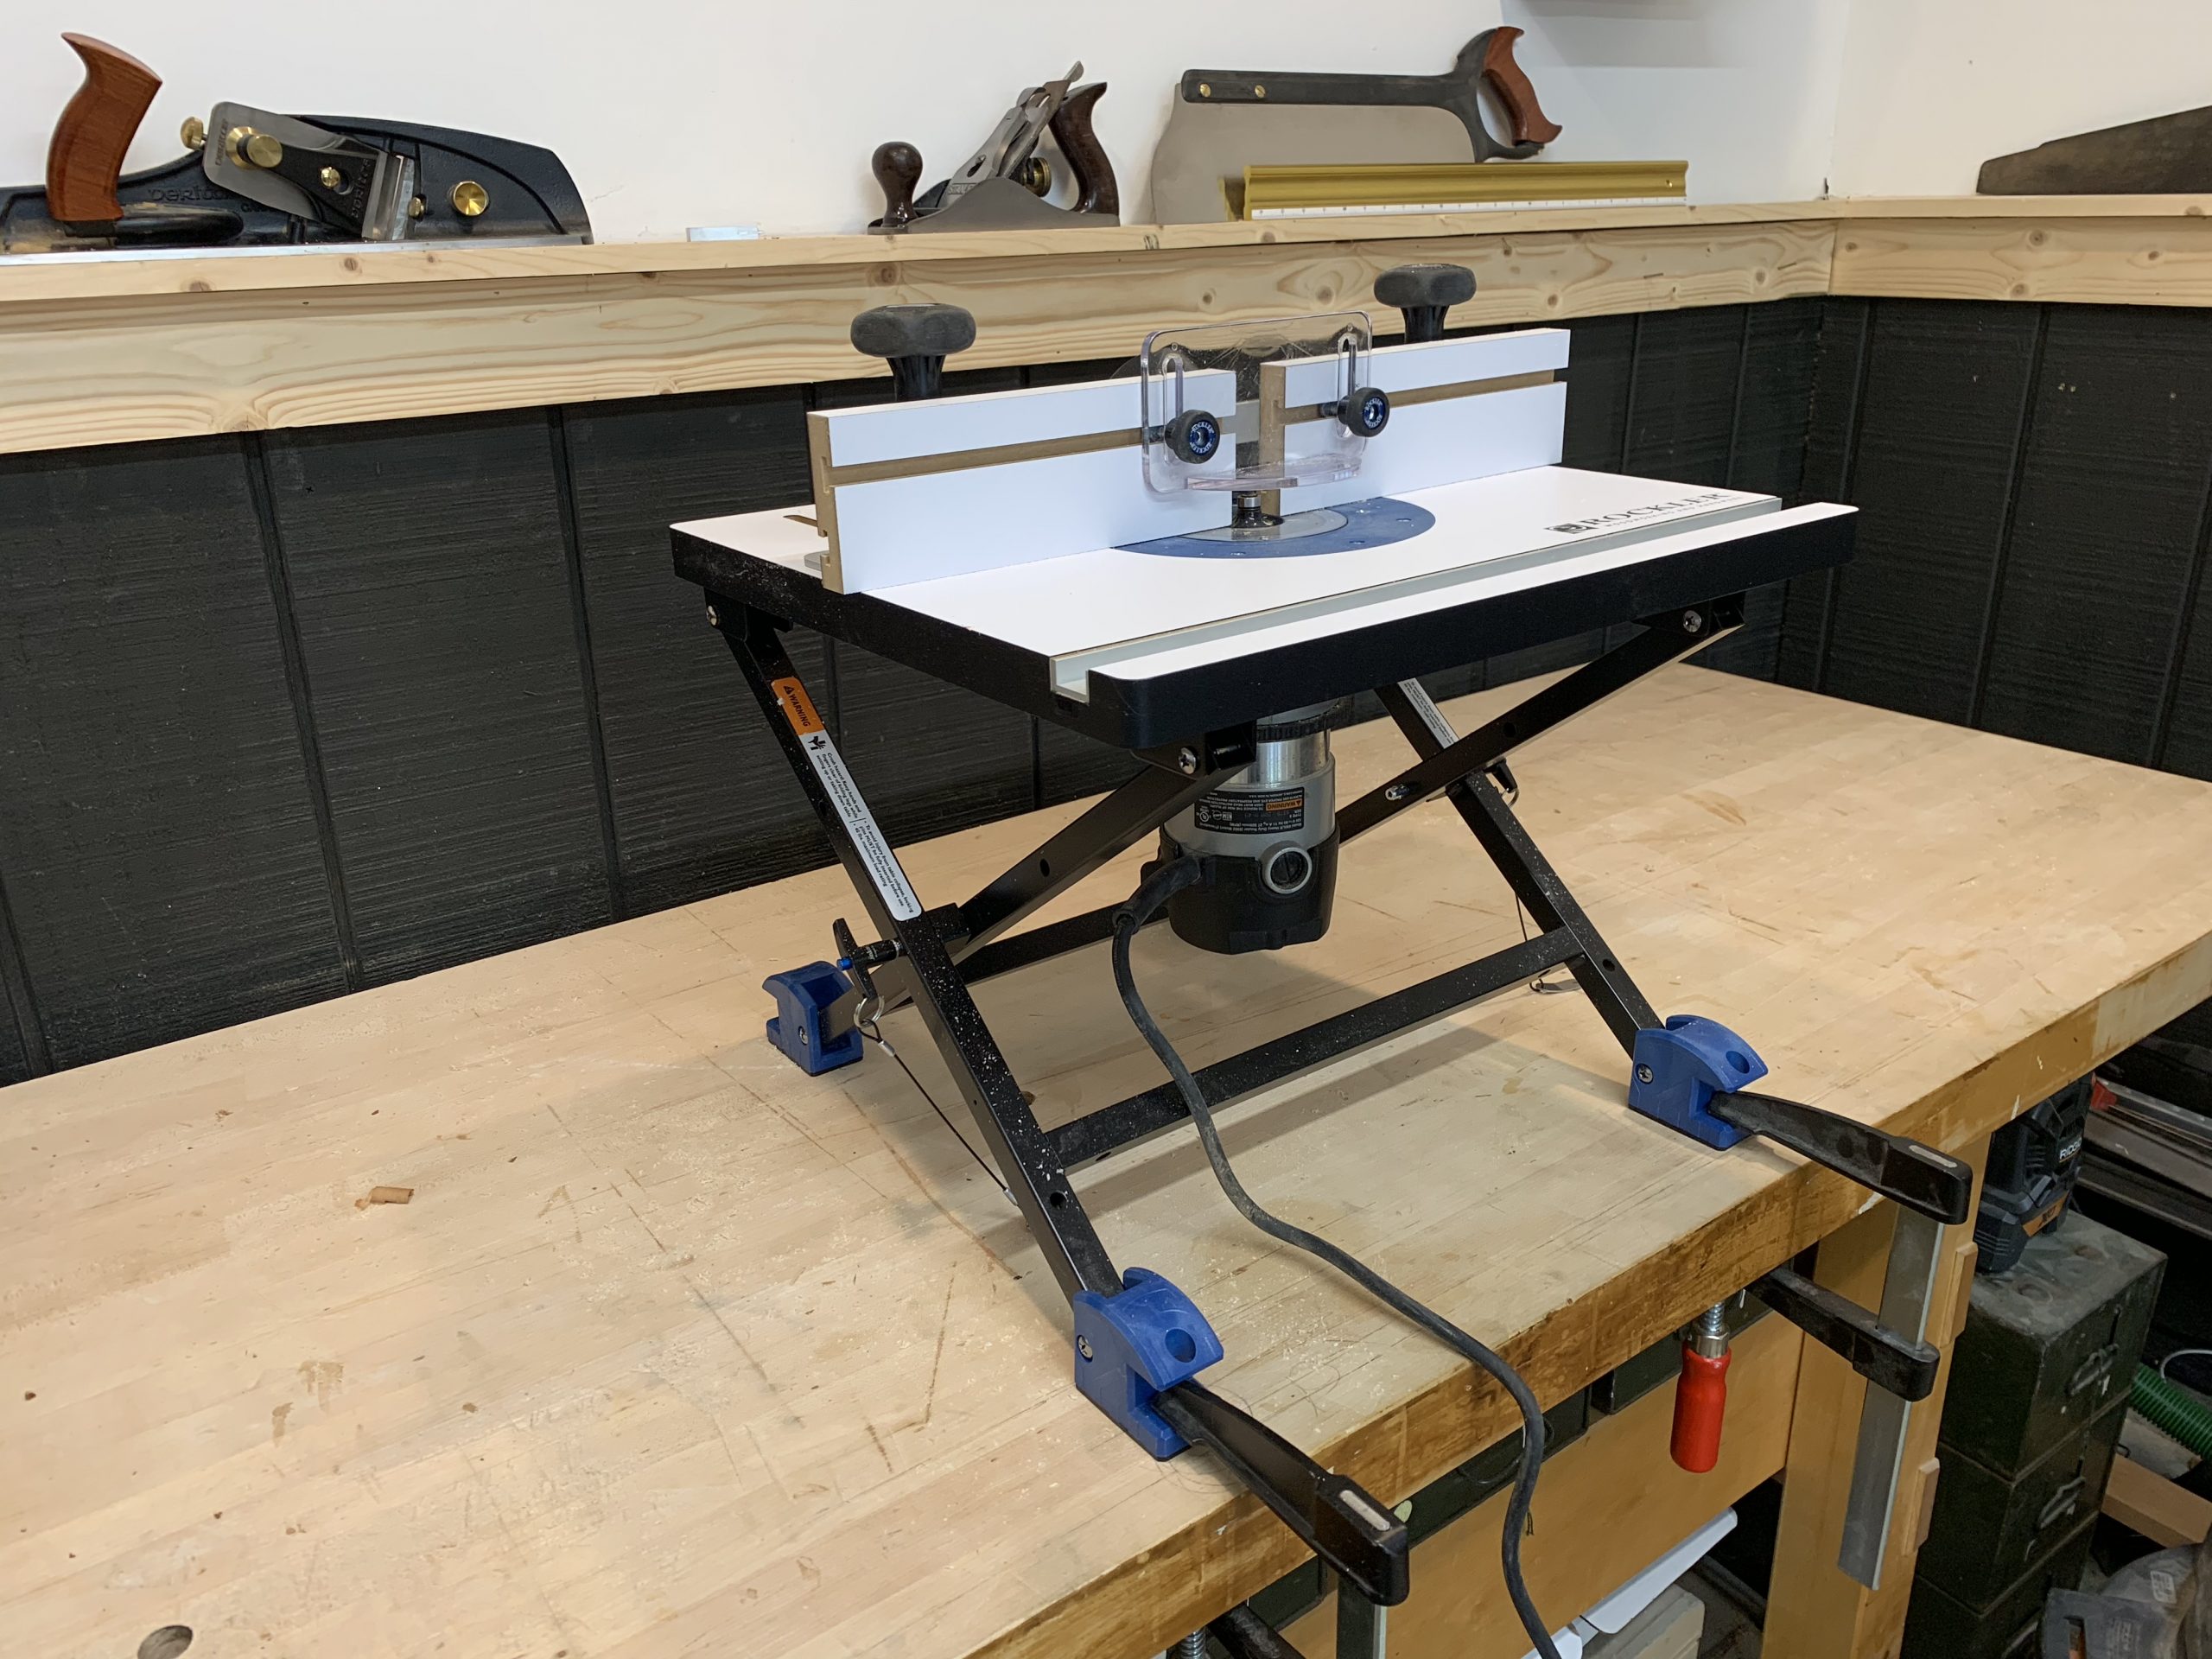 6 Best Portable Router Tables in 2022 Reviews & Buying Guide